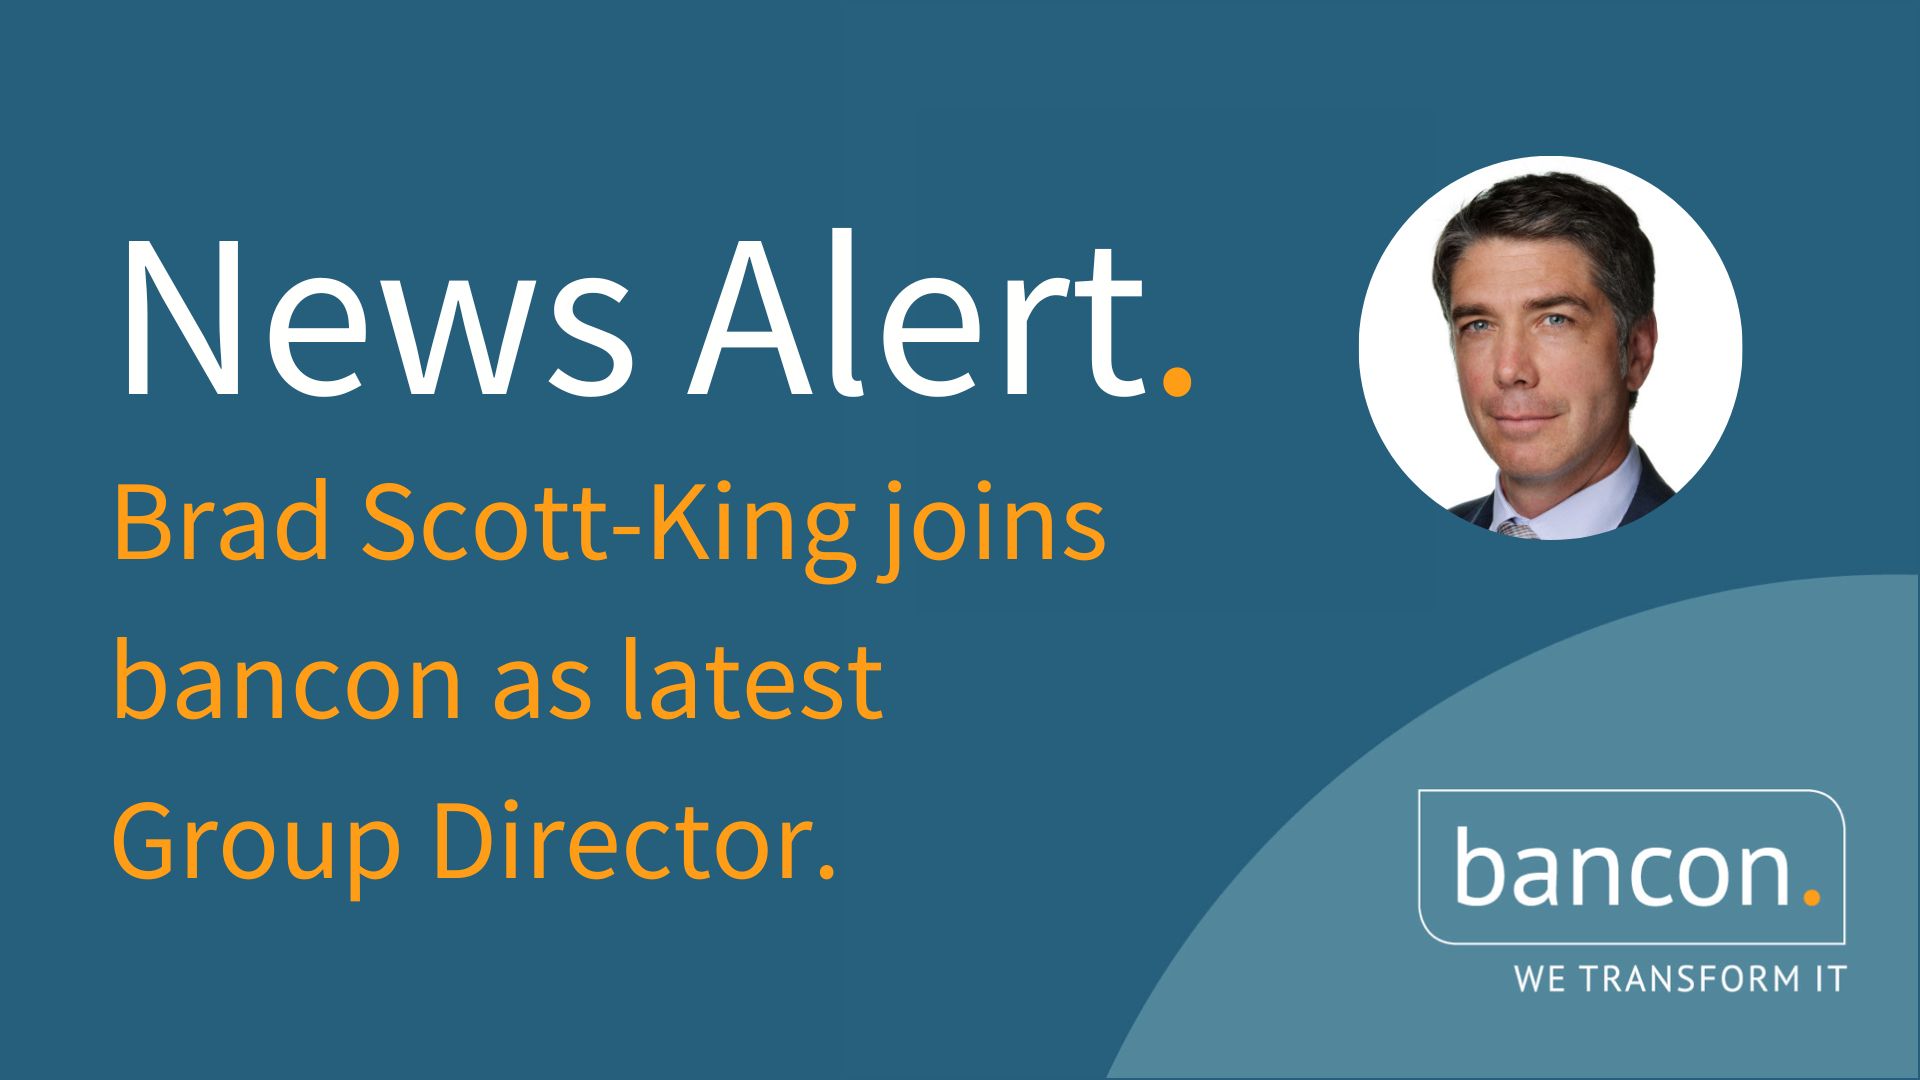 bancon announce Brad Scott-King as newest Group Director